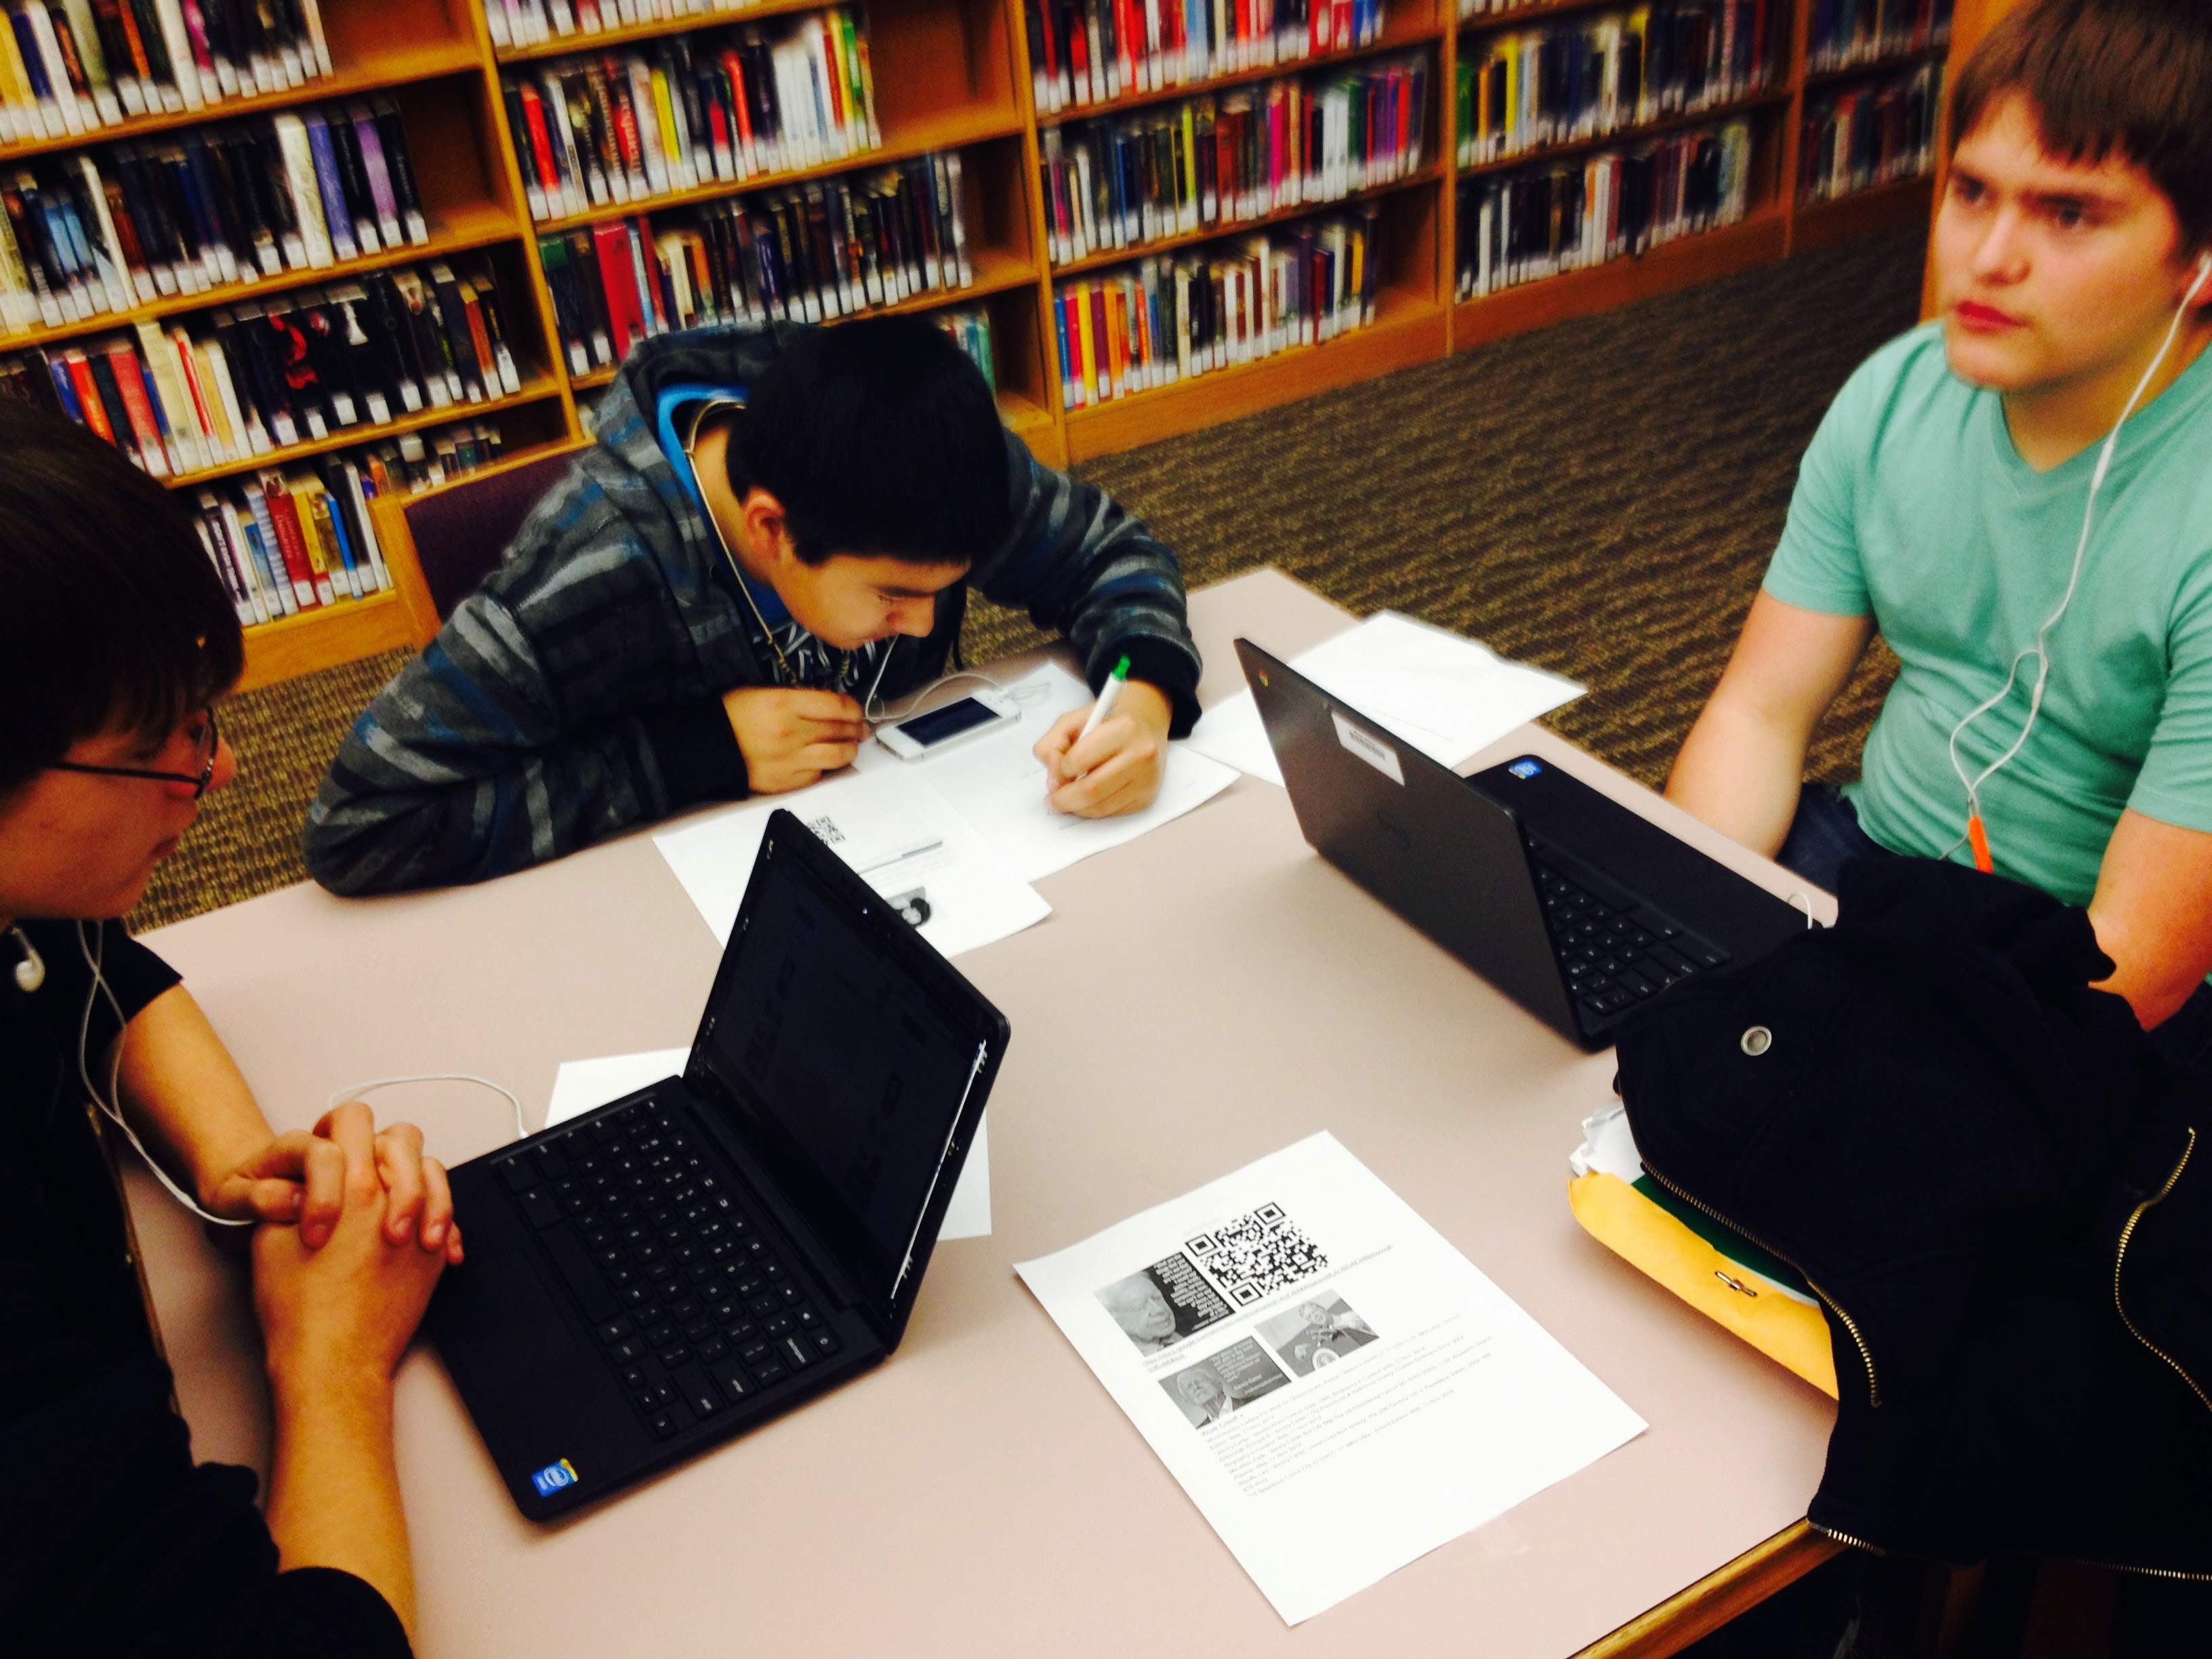 Students working on papers and on Chromebooks in the library